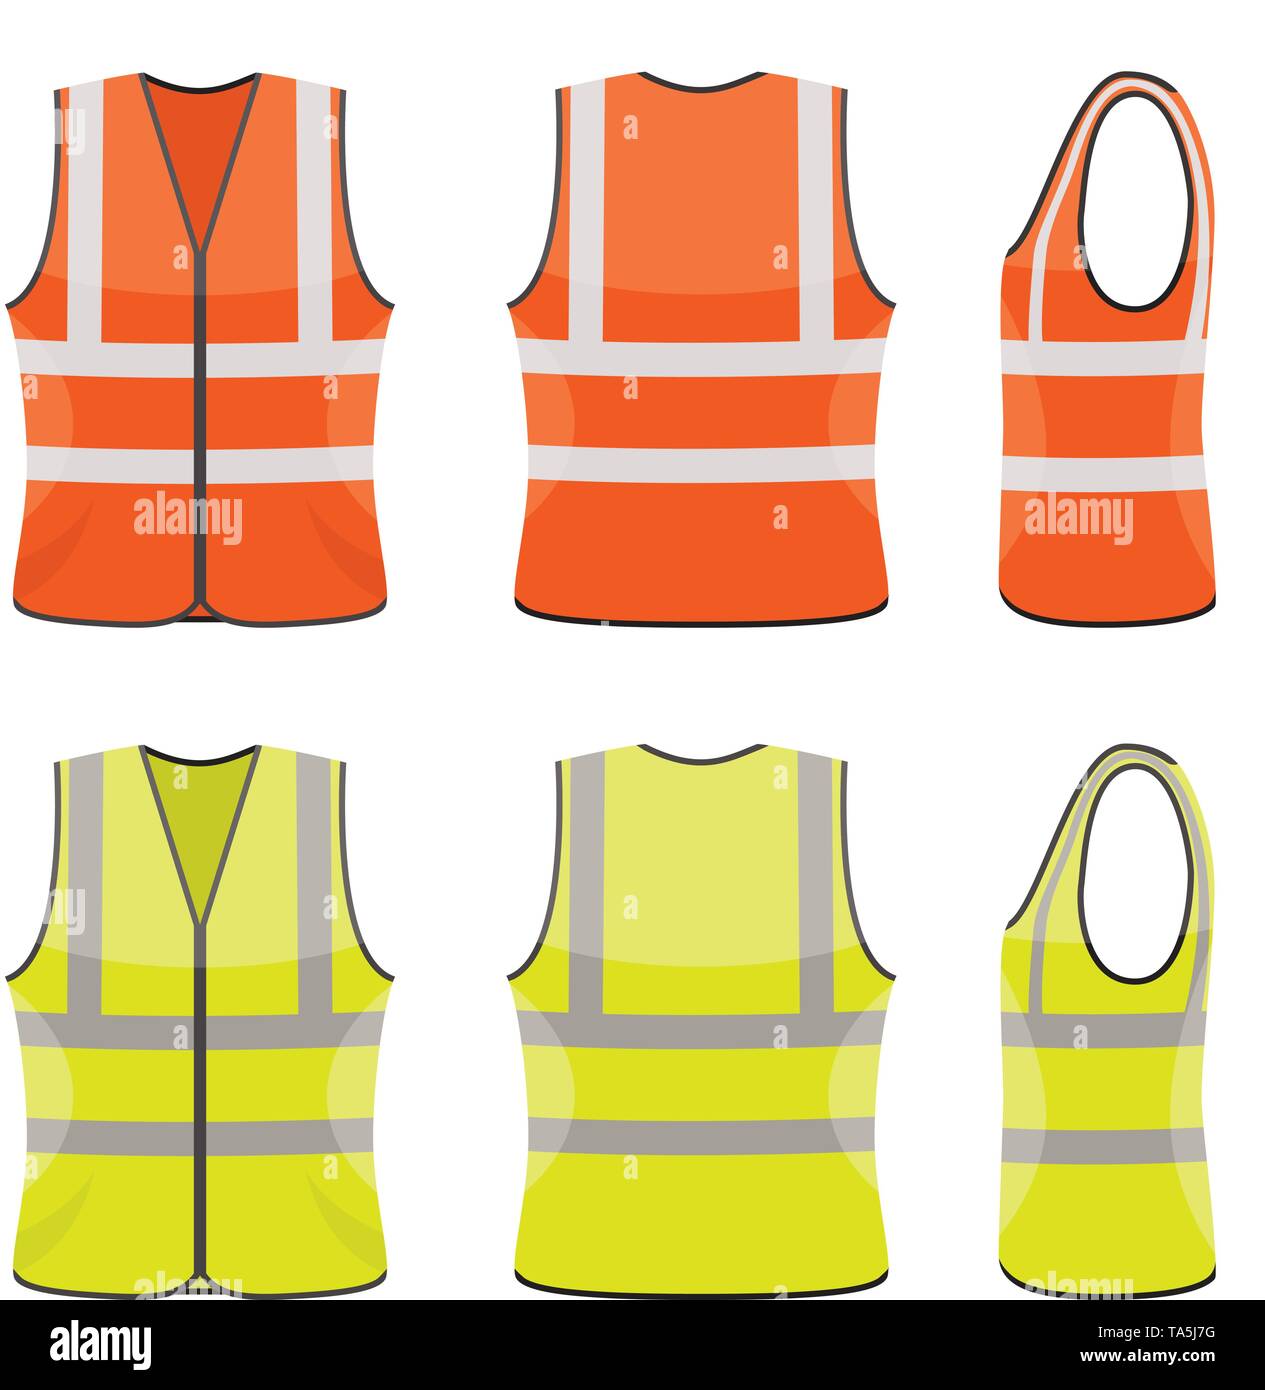 vector set of orange and yellow safety vests isolated on white background. reflective safety vest jacket. icon of safe uniform for workers Stock Vector